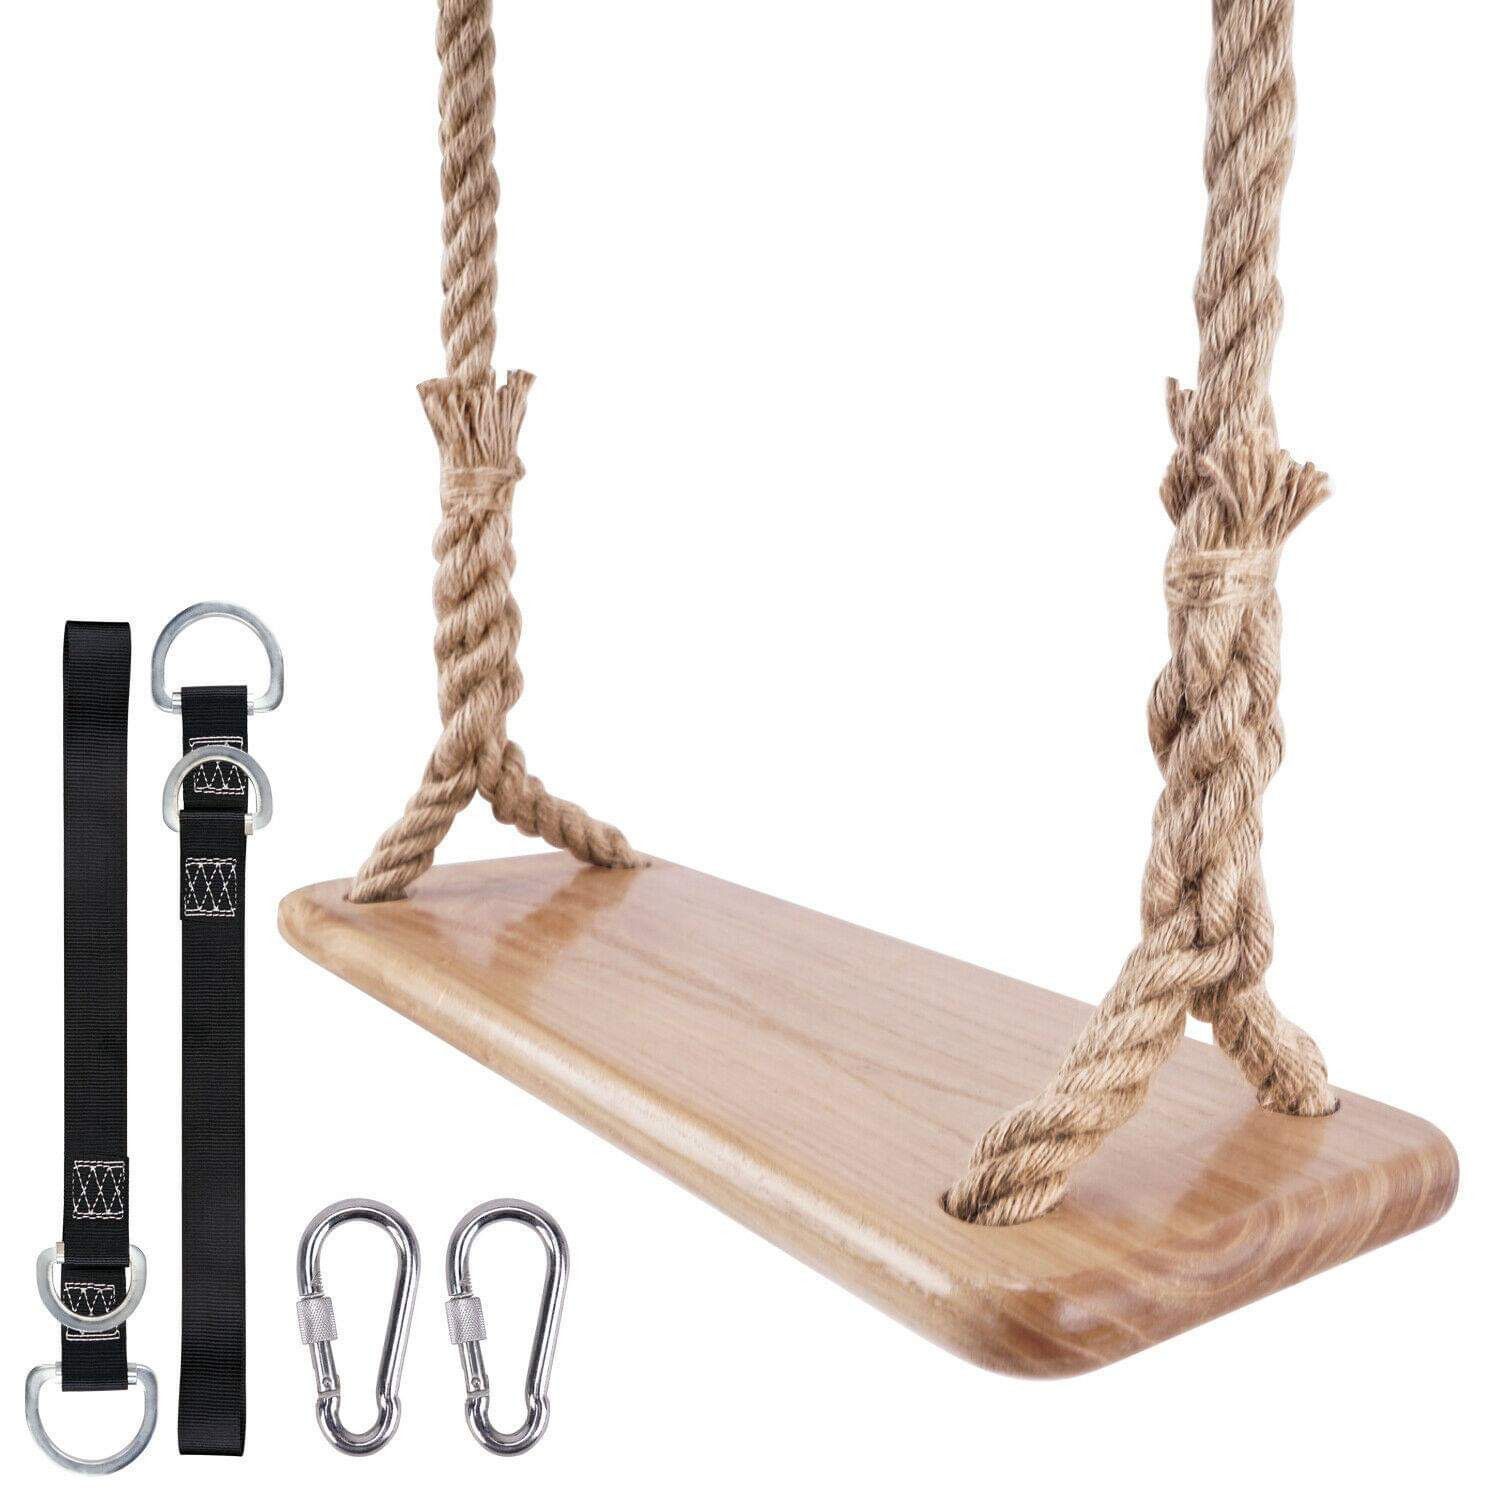 NEW Wooden Tree Swing Seat for Kid/Family Use